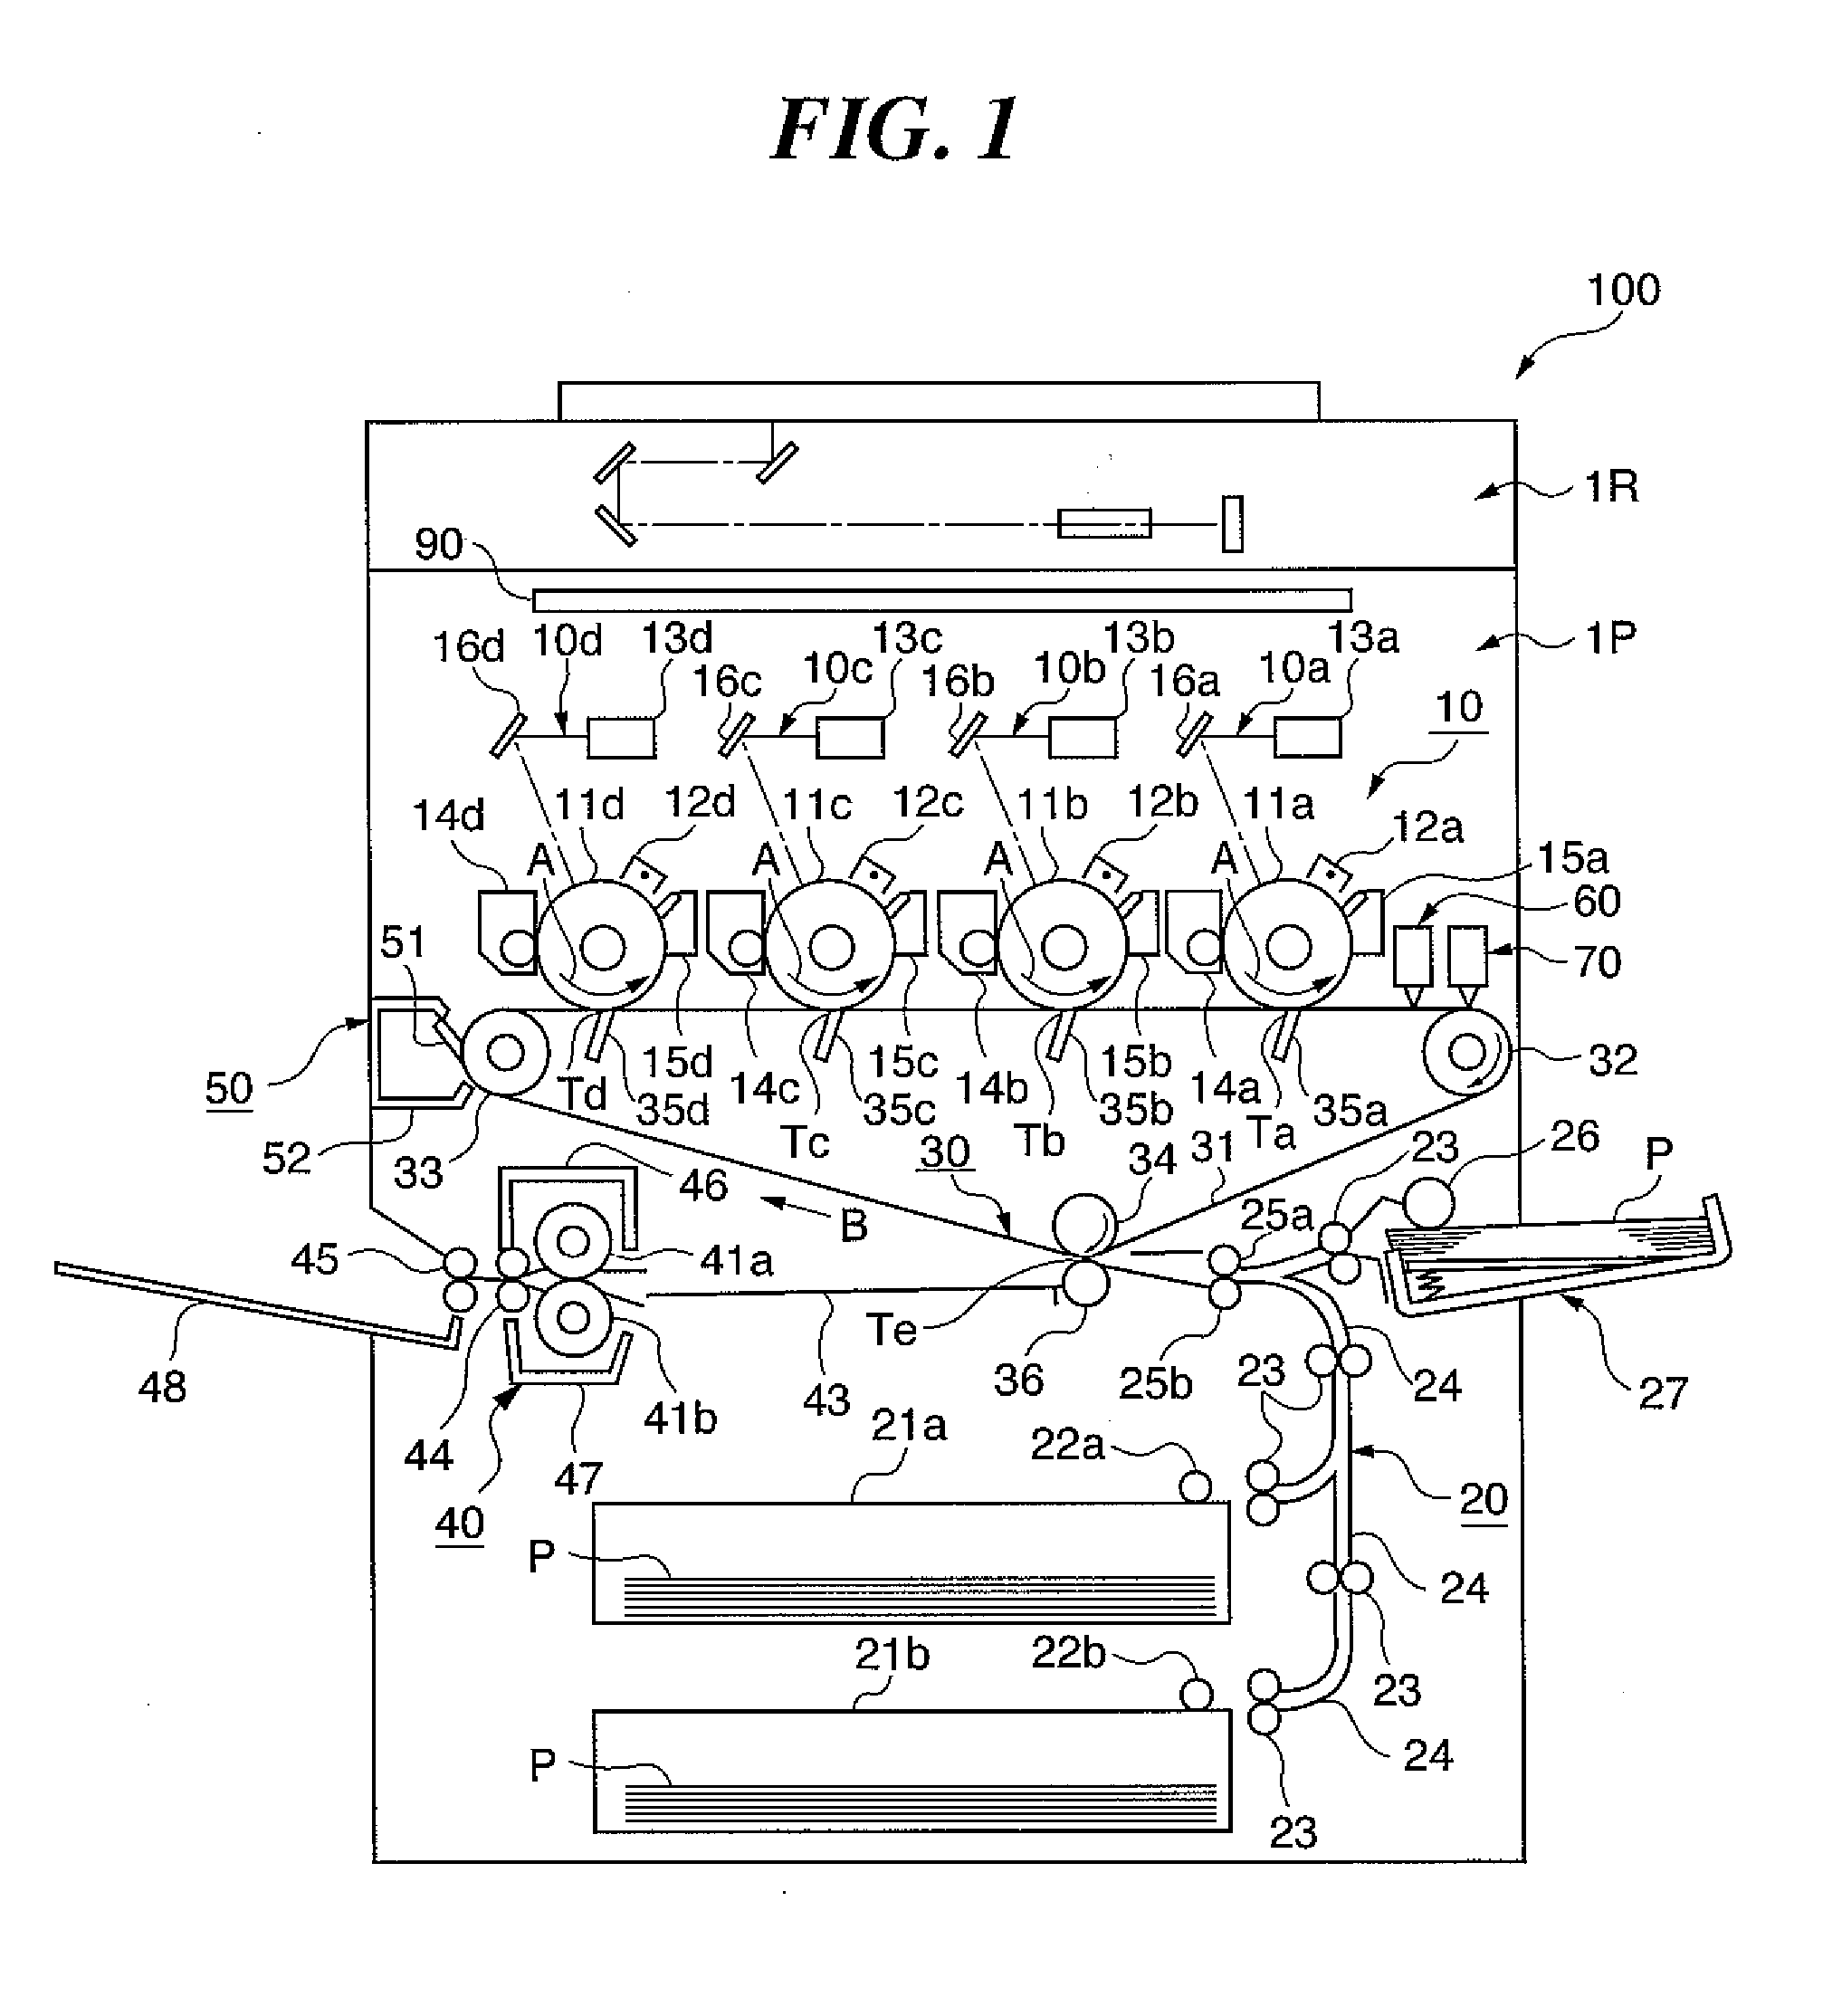 Image forming apparatus and method of controlling the same